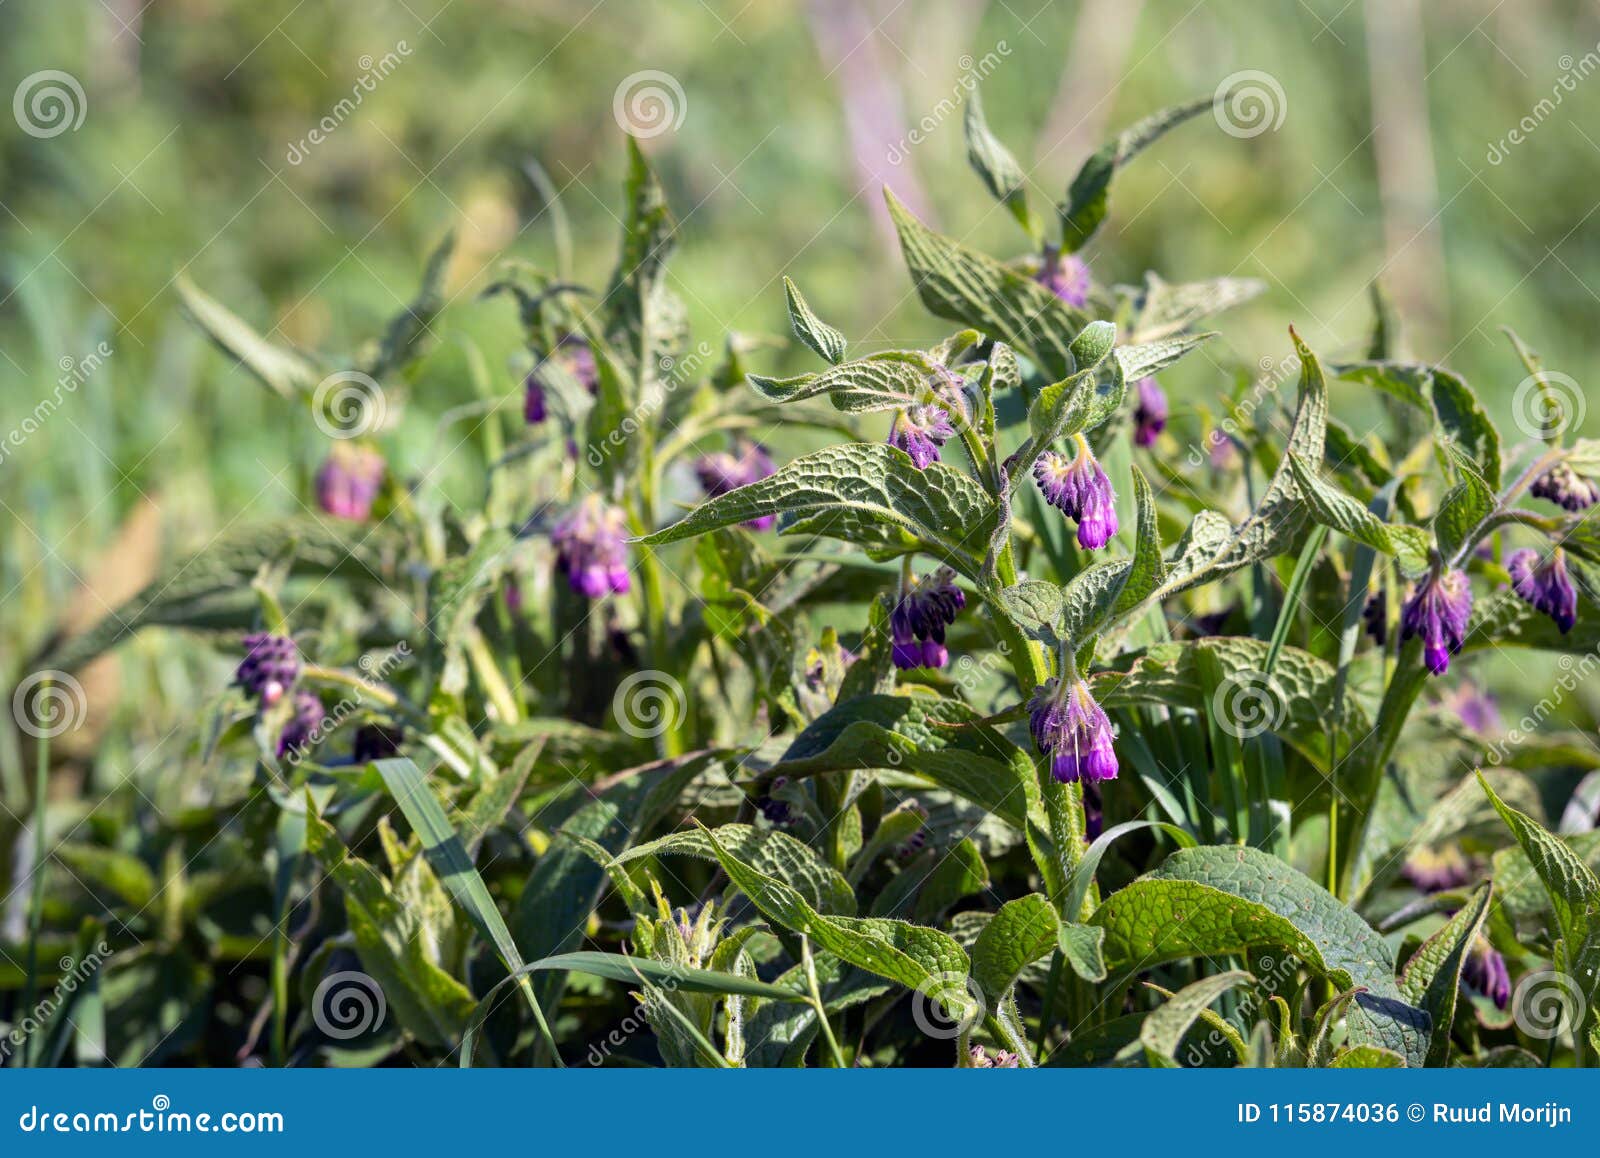 Purple Flowers Of A Common Comfrey Plant Growing In Wild Nature Stock Photo Image Of Boneset Blooming 115874036